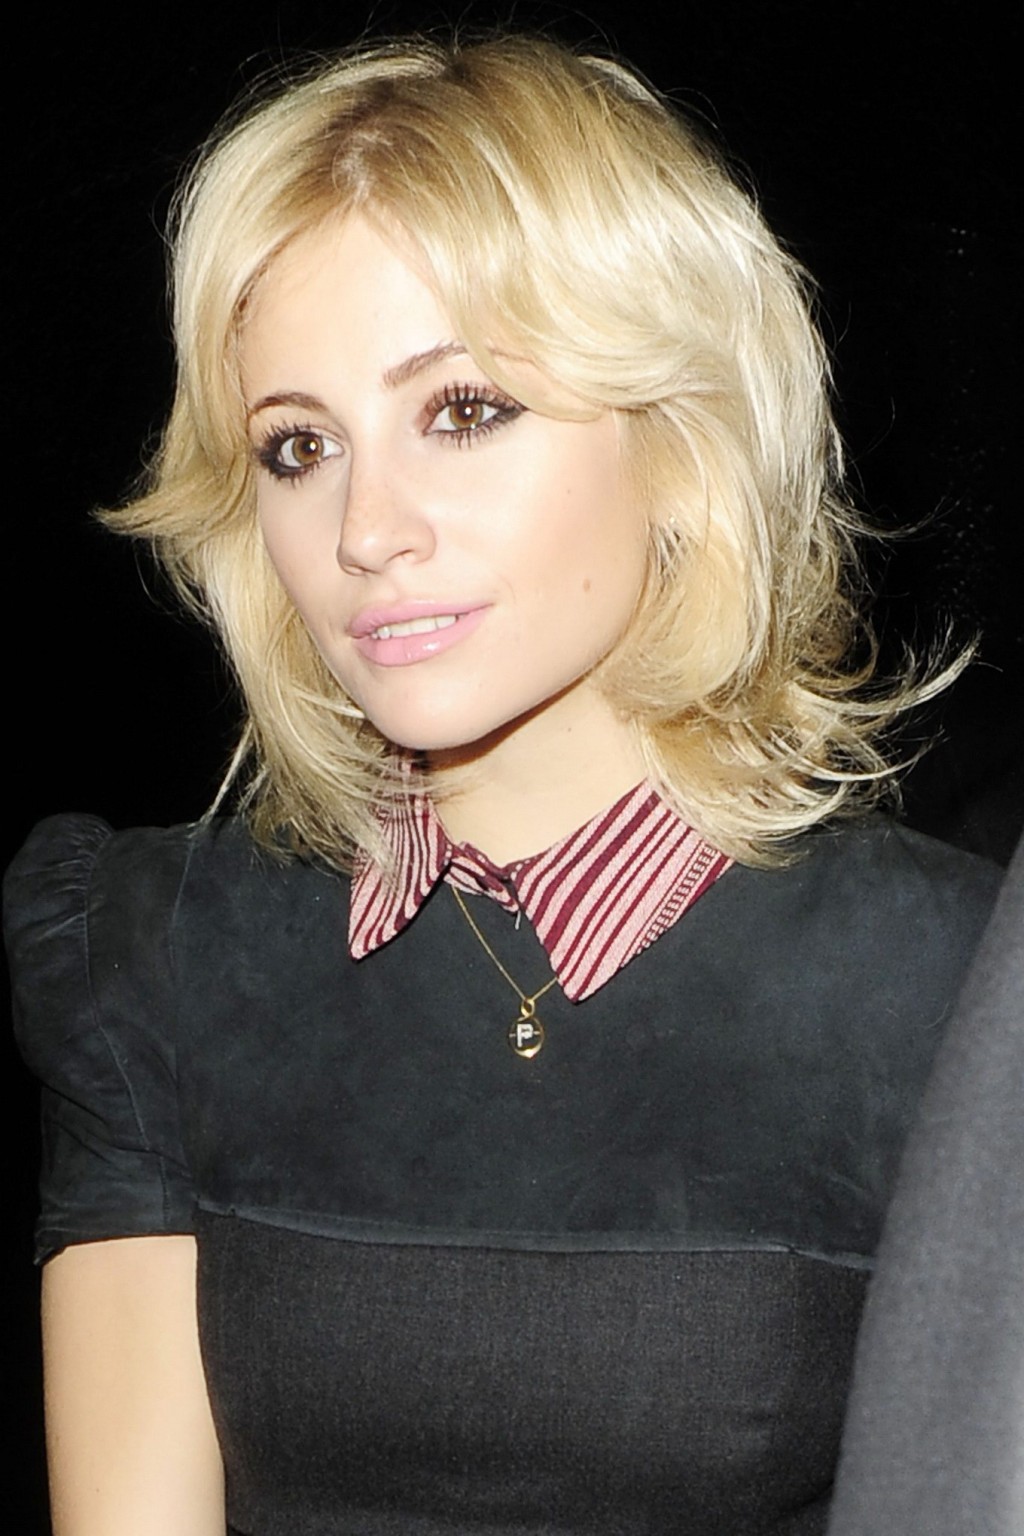 Pixie Lott flashing her panties outside the Rose Club in London #75265470